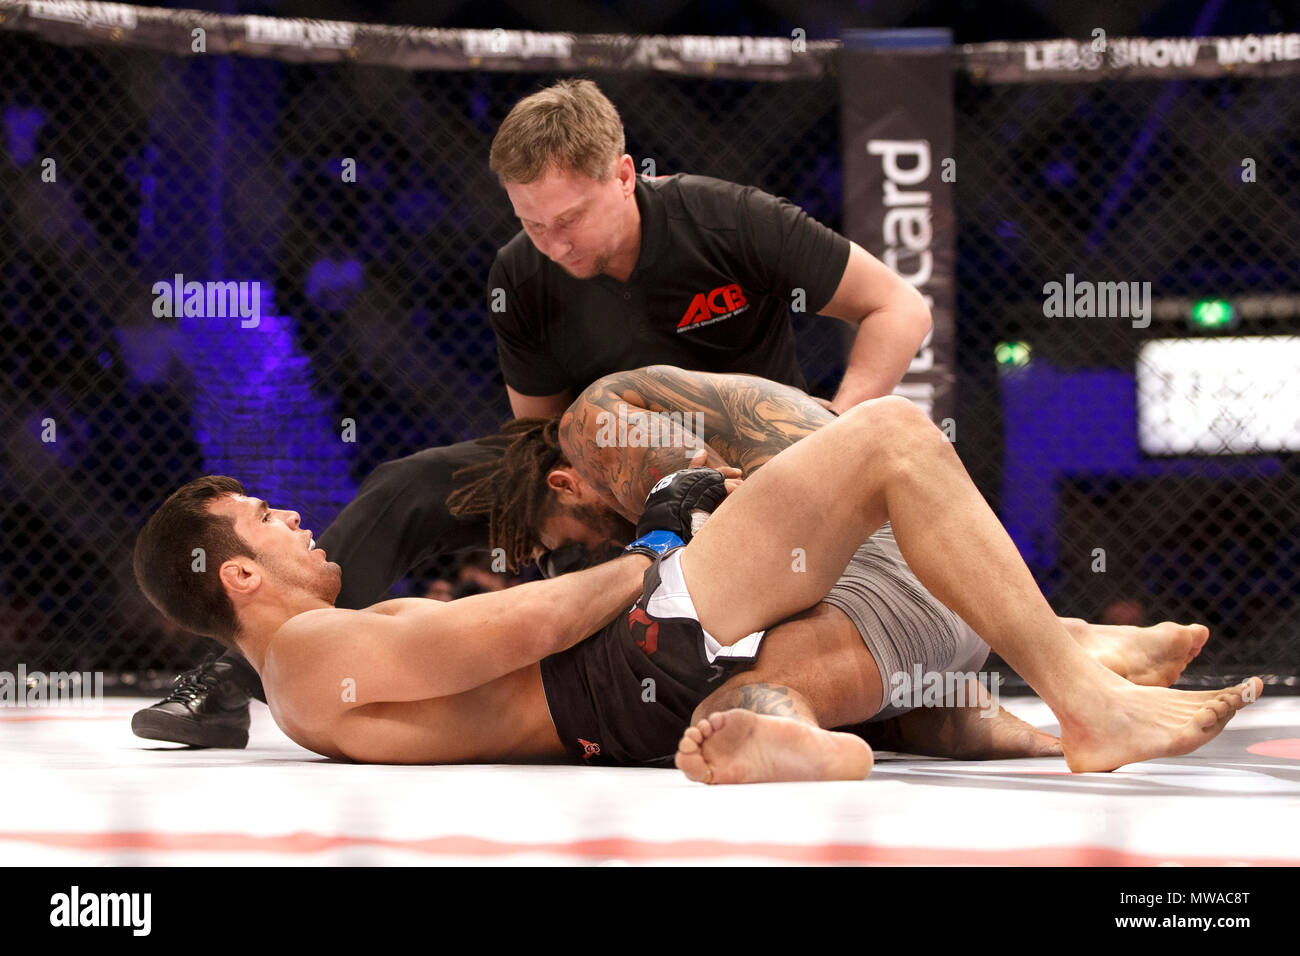 MMA referee Viktor Korneev steps in to stop a fight between Aurel Pirtea and Saul Rogers at ACB 54 in Manchester, UK. Pirtea won in the second round by submission. Absolute Championship Berkut, Mixed Martial Arts, MMA fight. Stock Photo